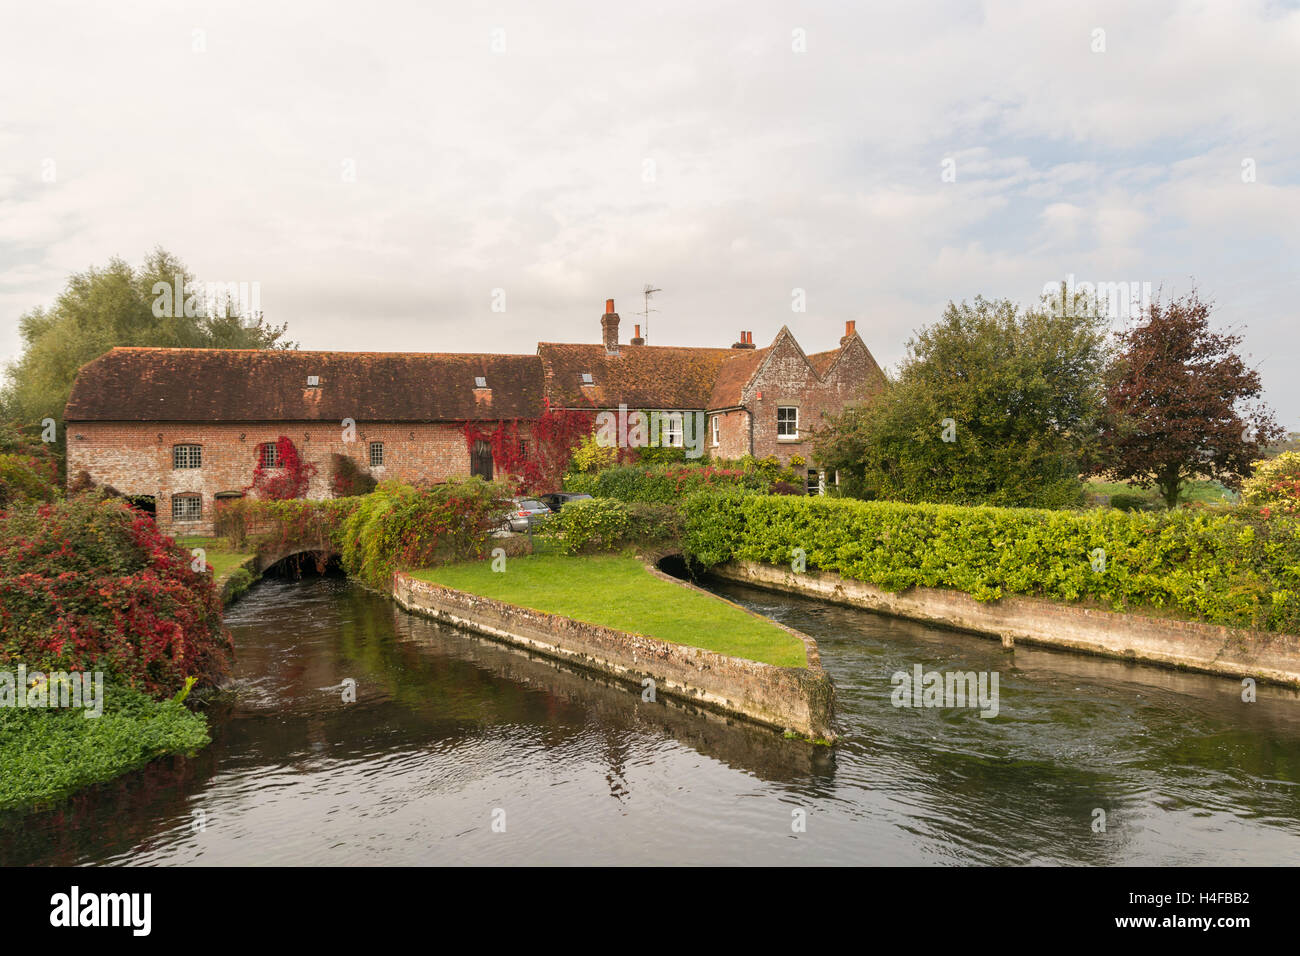 The grade II listed Mill House over the River Avon at Breamore, Hampshire, UK, between Downton and Fordingbridge. Stock Photo